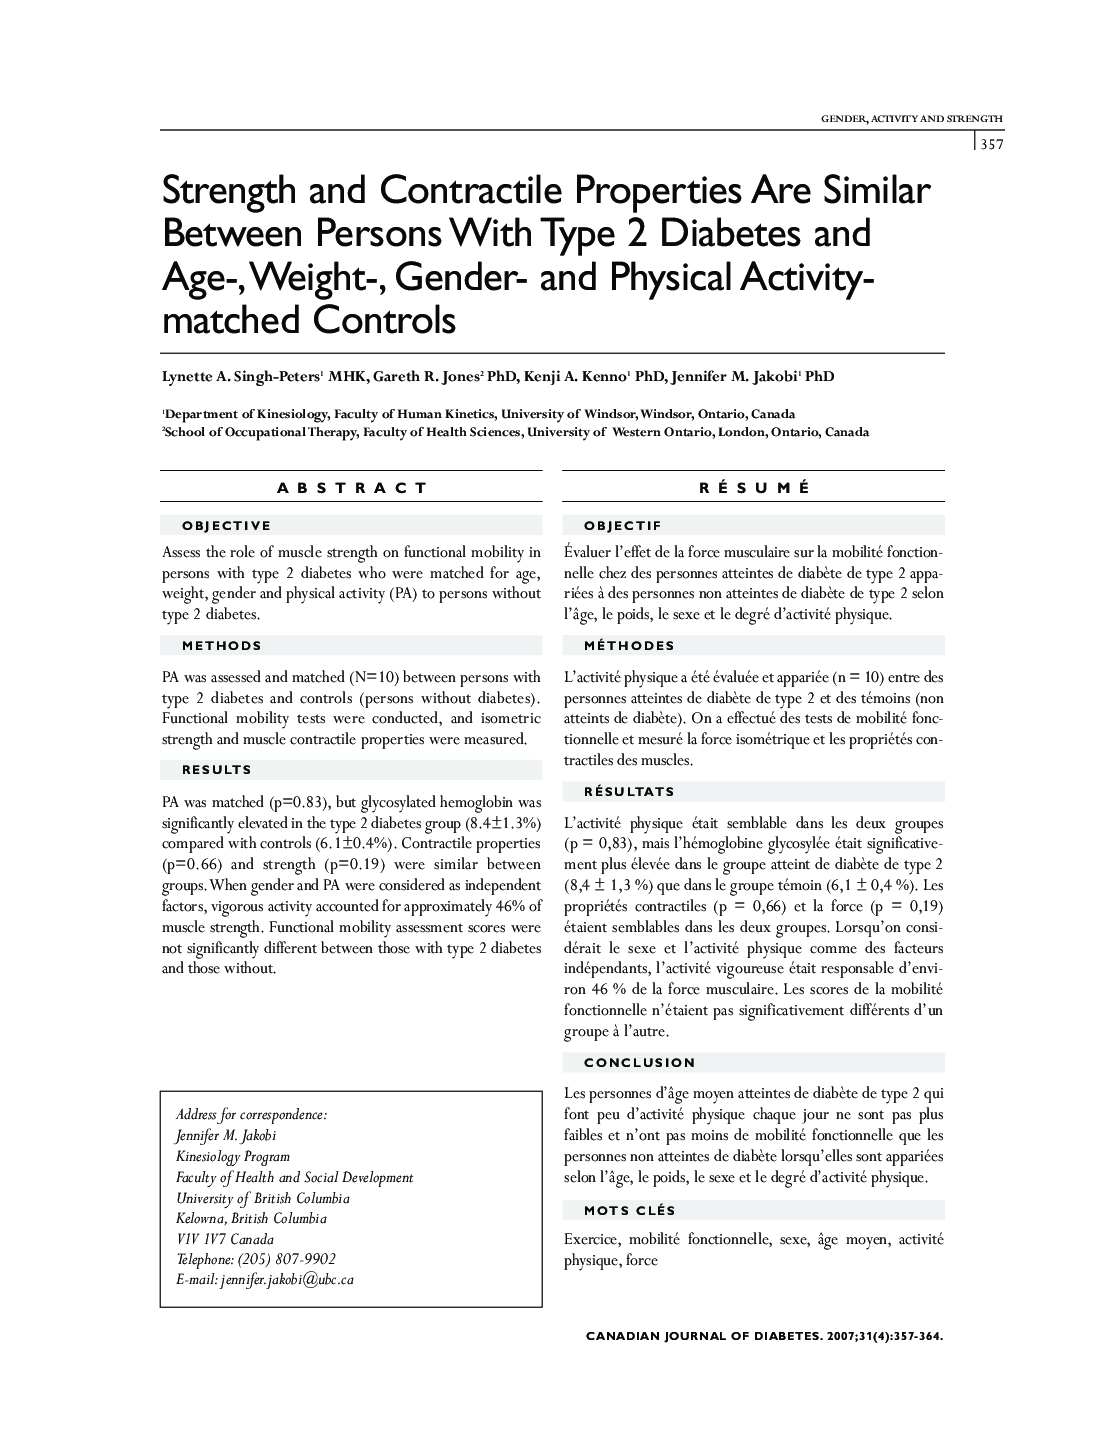 Strength and Contractile Properties Are Similar Between Persons With Type 2 Diabetes and Age-,Weight-, Gender- and Physical Activitymatched Controls